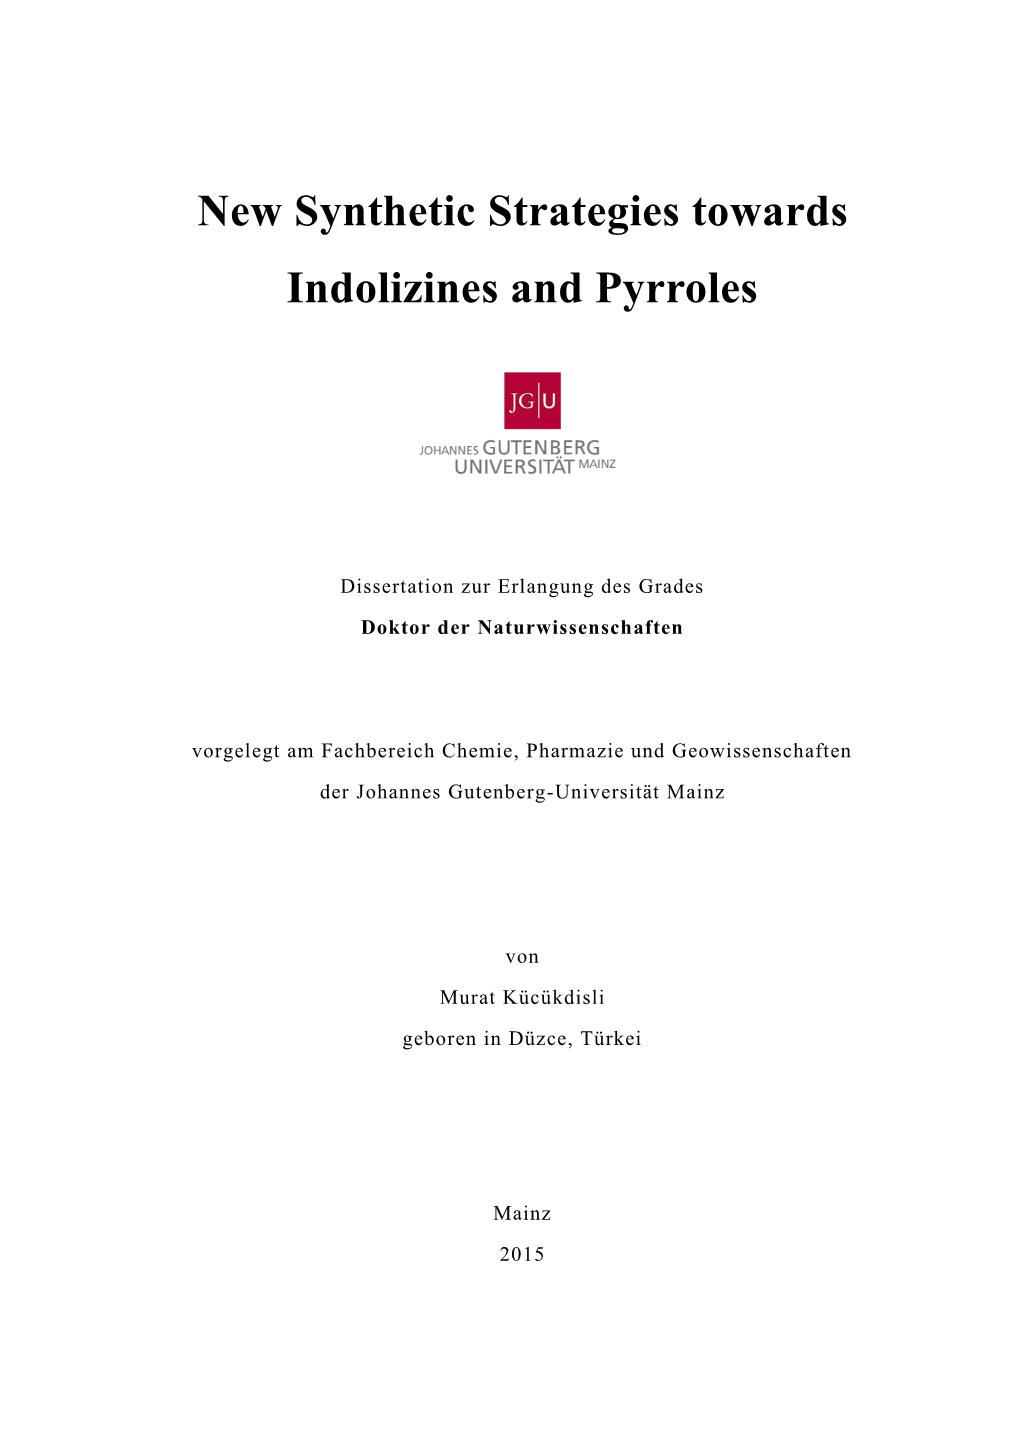 New Synthetic Strategies Towards Indolizines and Pyrroles